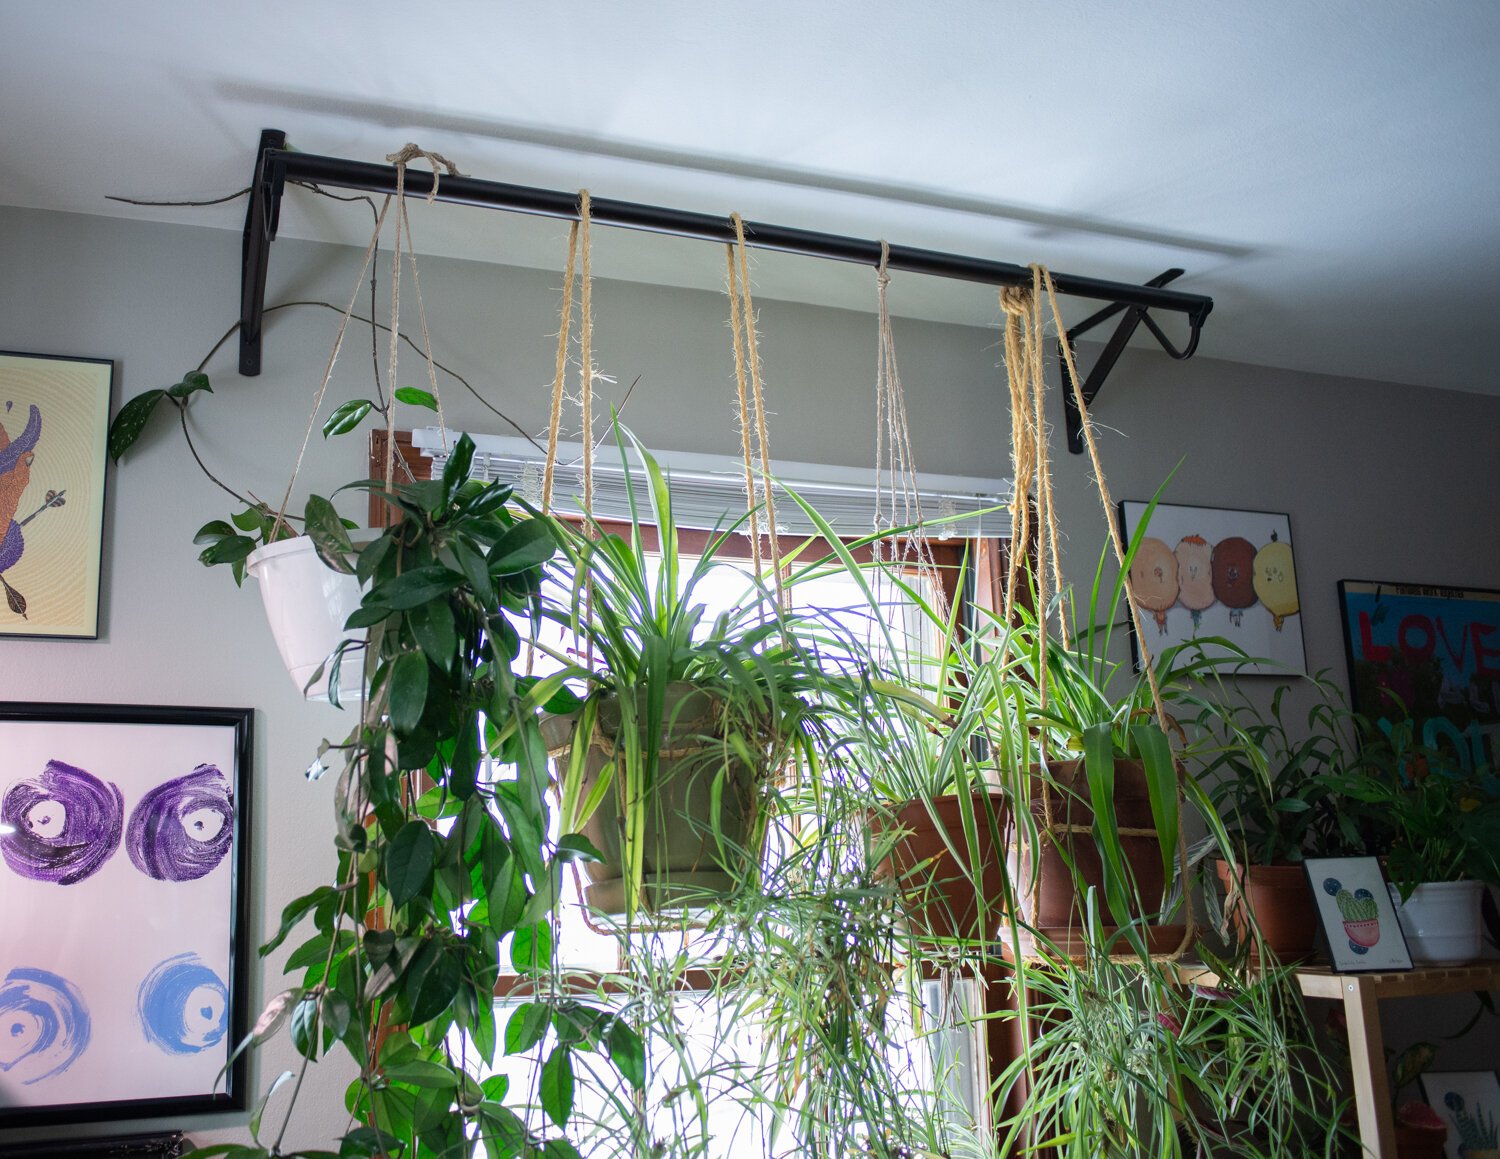 Plants are hung using extra support closet hangers in front of a window in their living room.